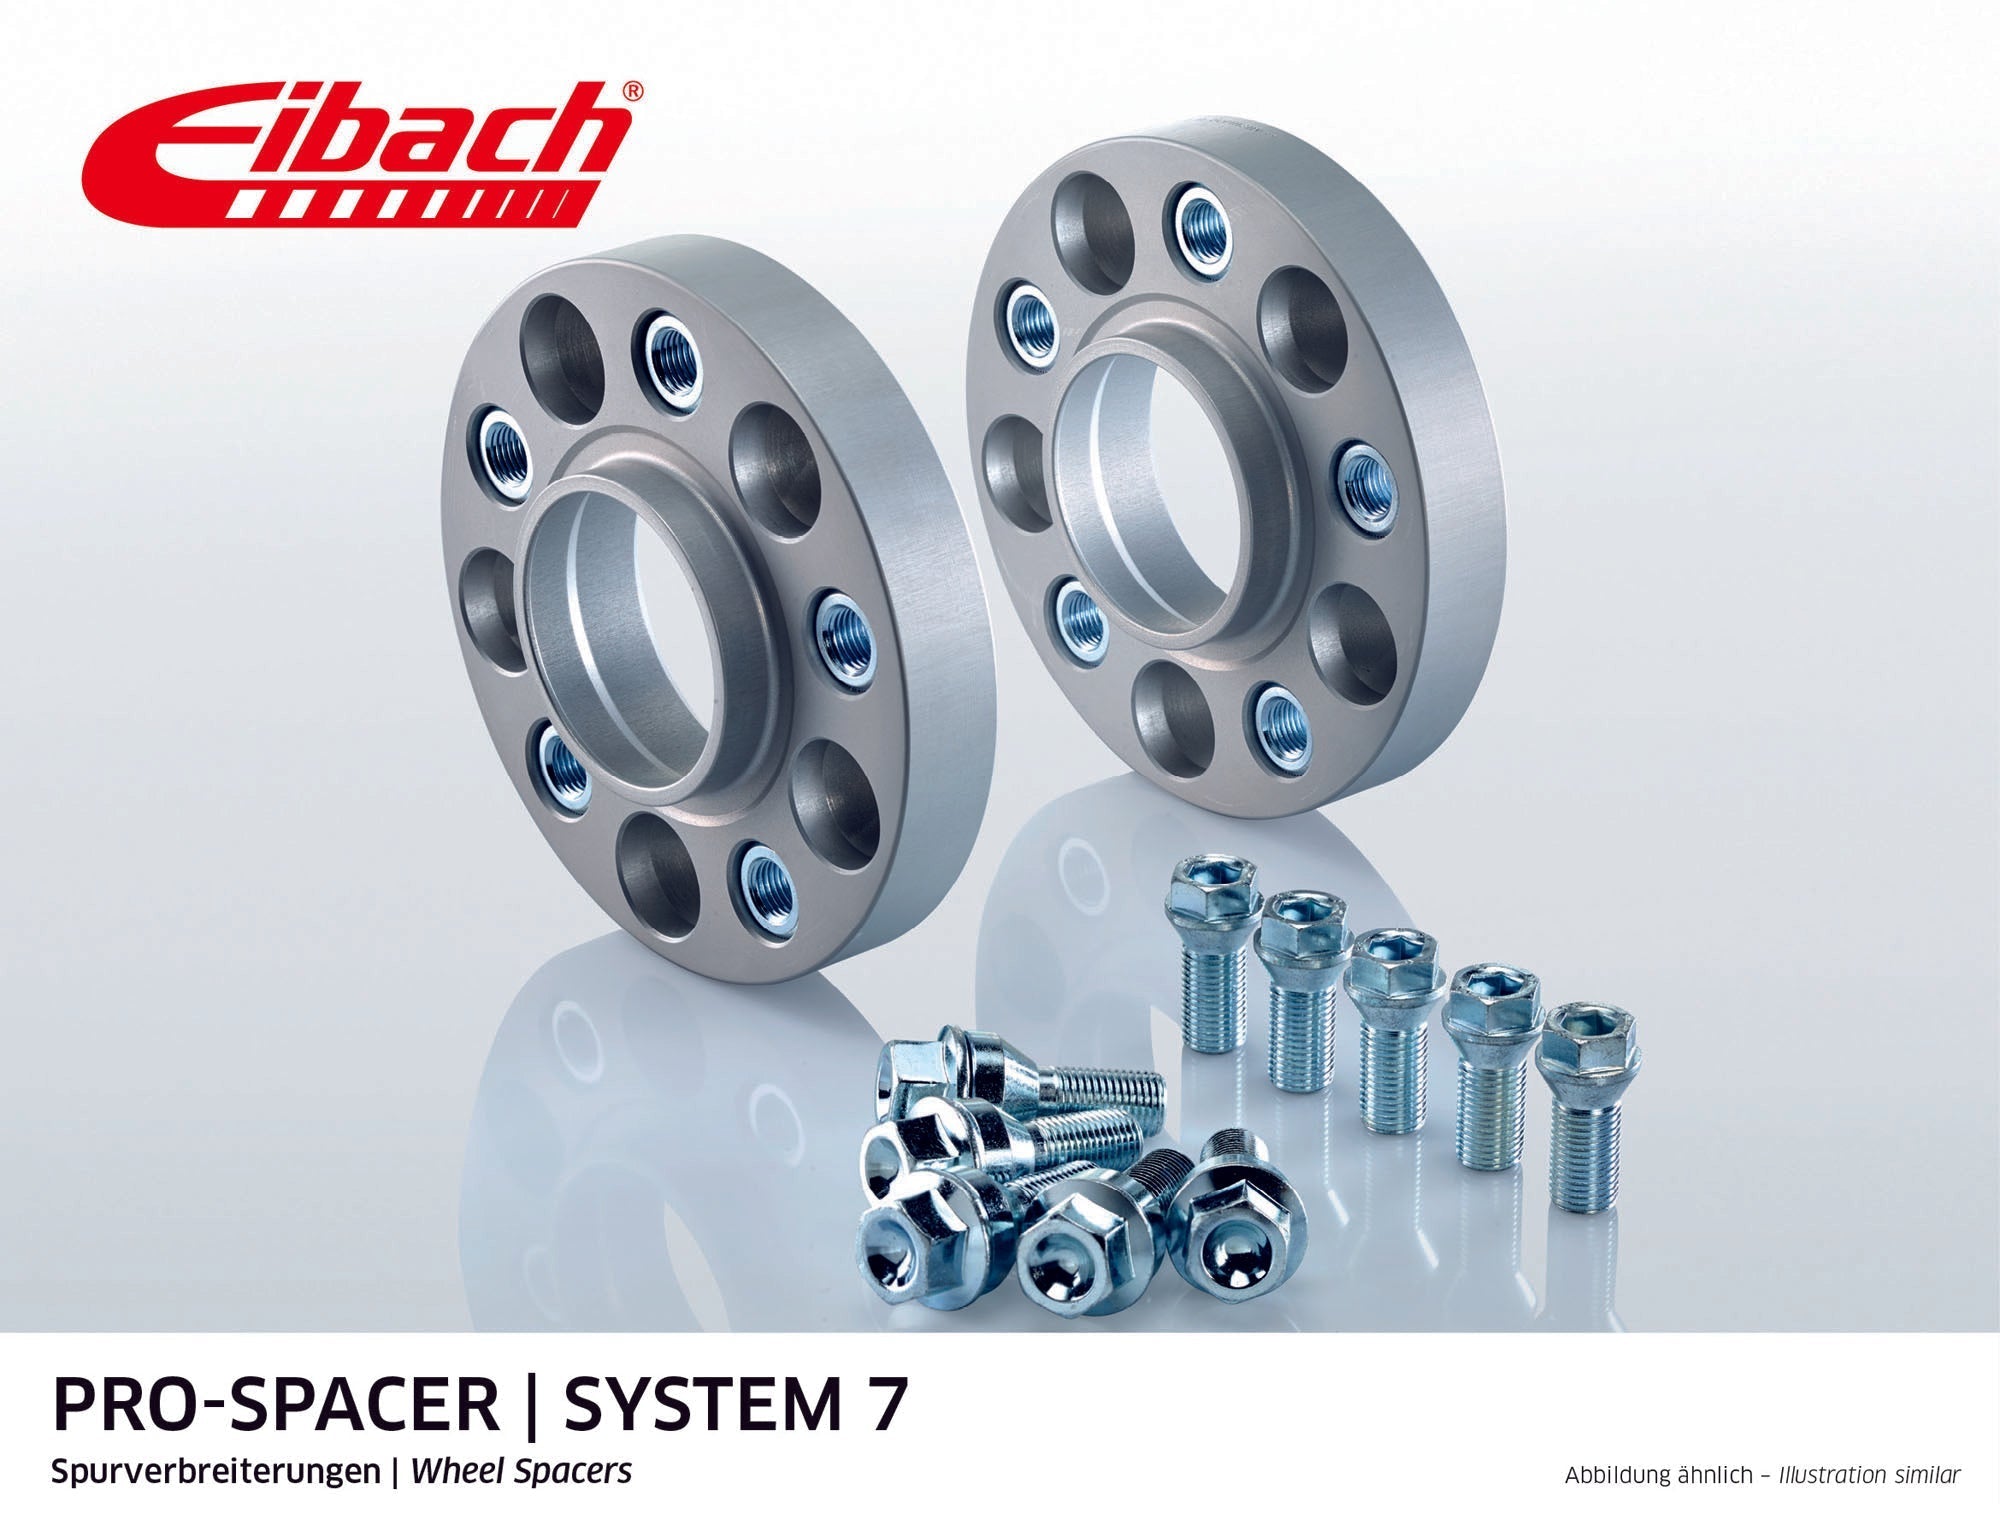 Eibach 25mm Pro-Spacer - Silver Anodized Wheel Spacer CAYENNE 2010-on #S90-7-25-050